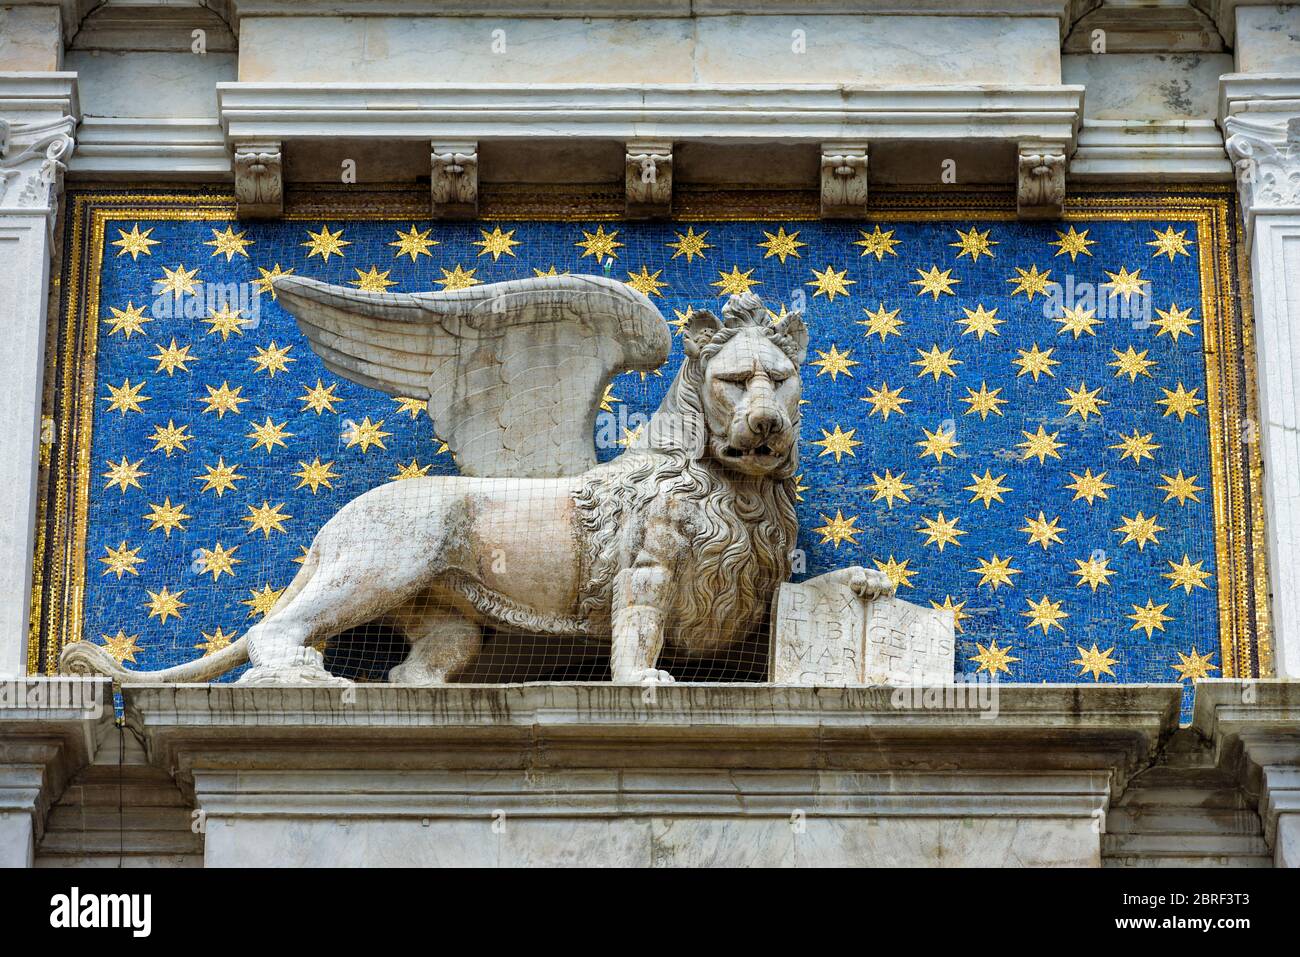 The statue of the winged lion on the Cklock Tower (Torre dell'Orologio) in the St. Mark's Square in Venice, Italy. The winged lion is a symbol of Veni Stock Photo